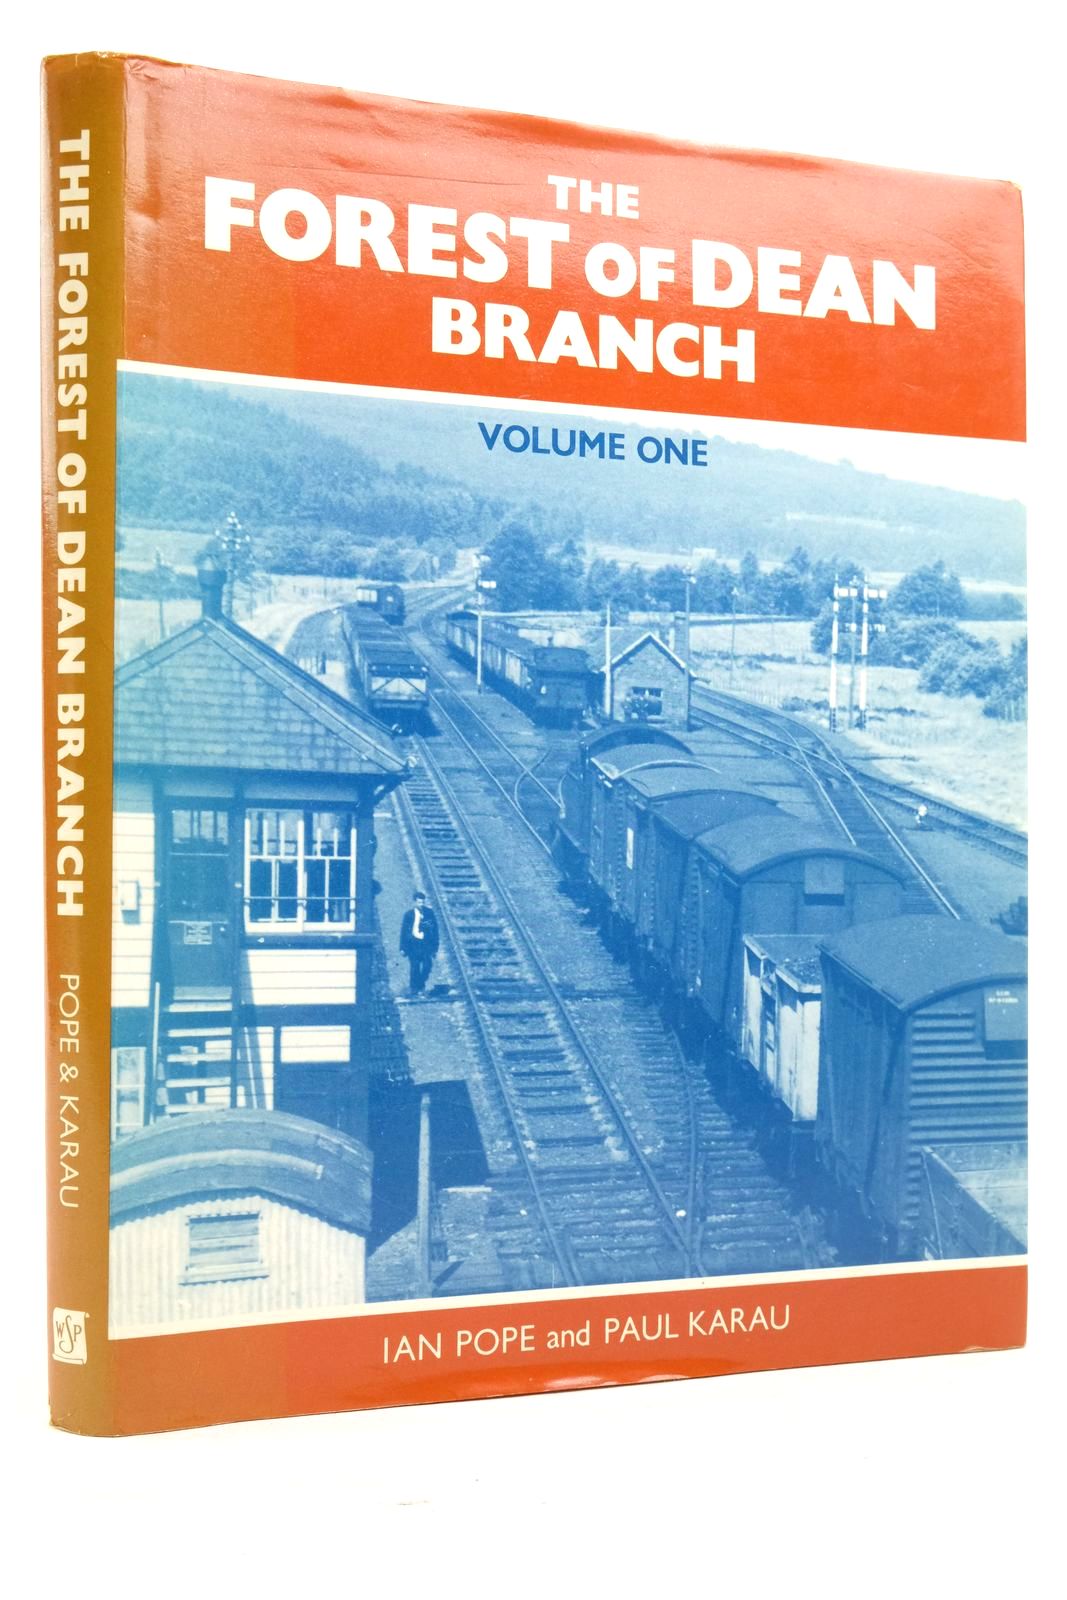 Photo of THE FOREST OF DEAN BRANCH VOLUME ONE written by Pope, Ian
Karau, Paul published by Wild Swan Publications (STOCK CODE: 2137984)  for sale by Stella & Rose's Books